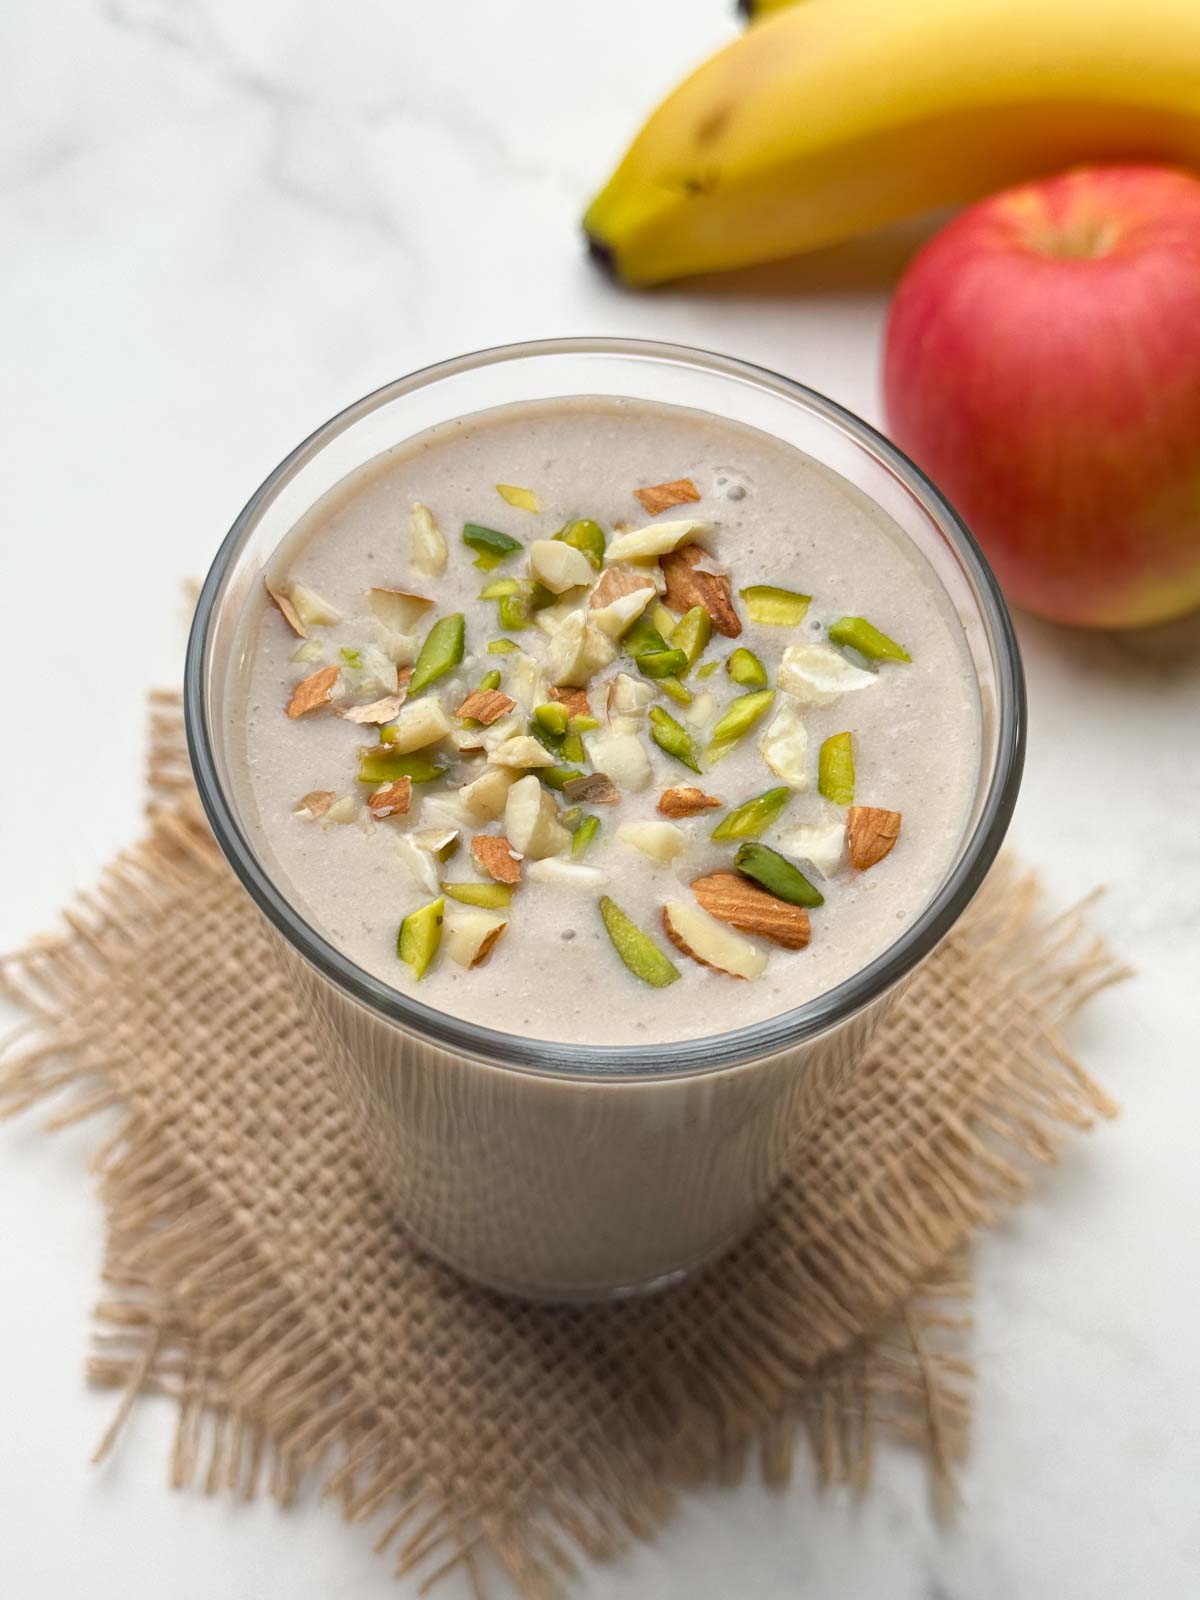 apple banana smoothie in a glass garnished with nuts with fruit in the background